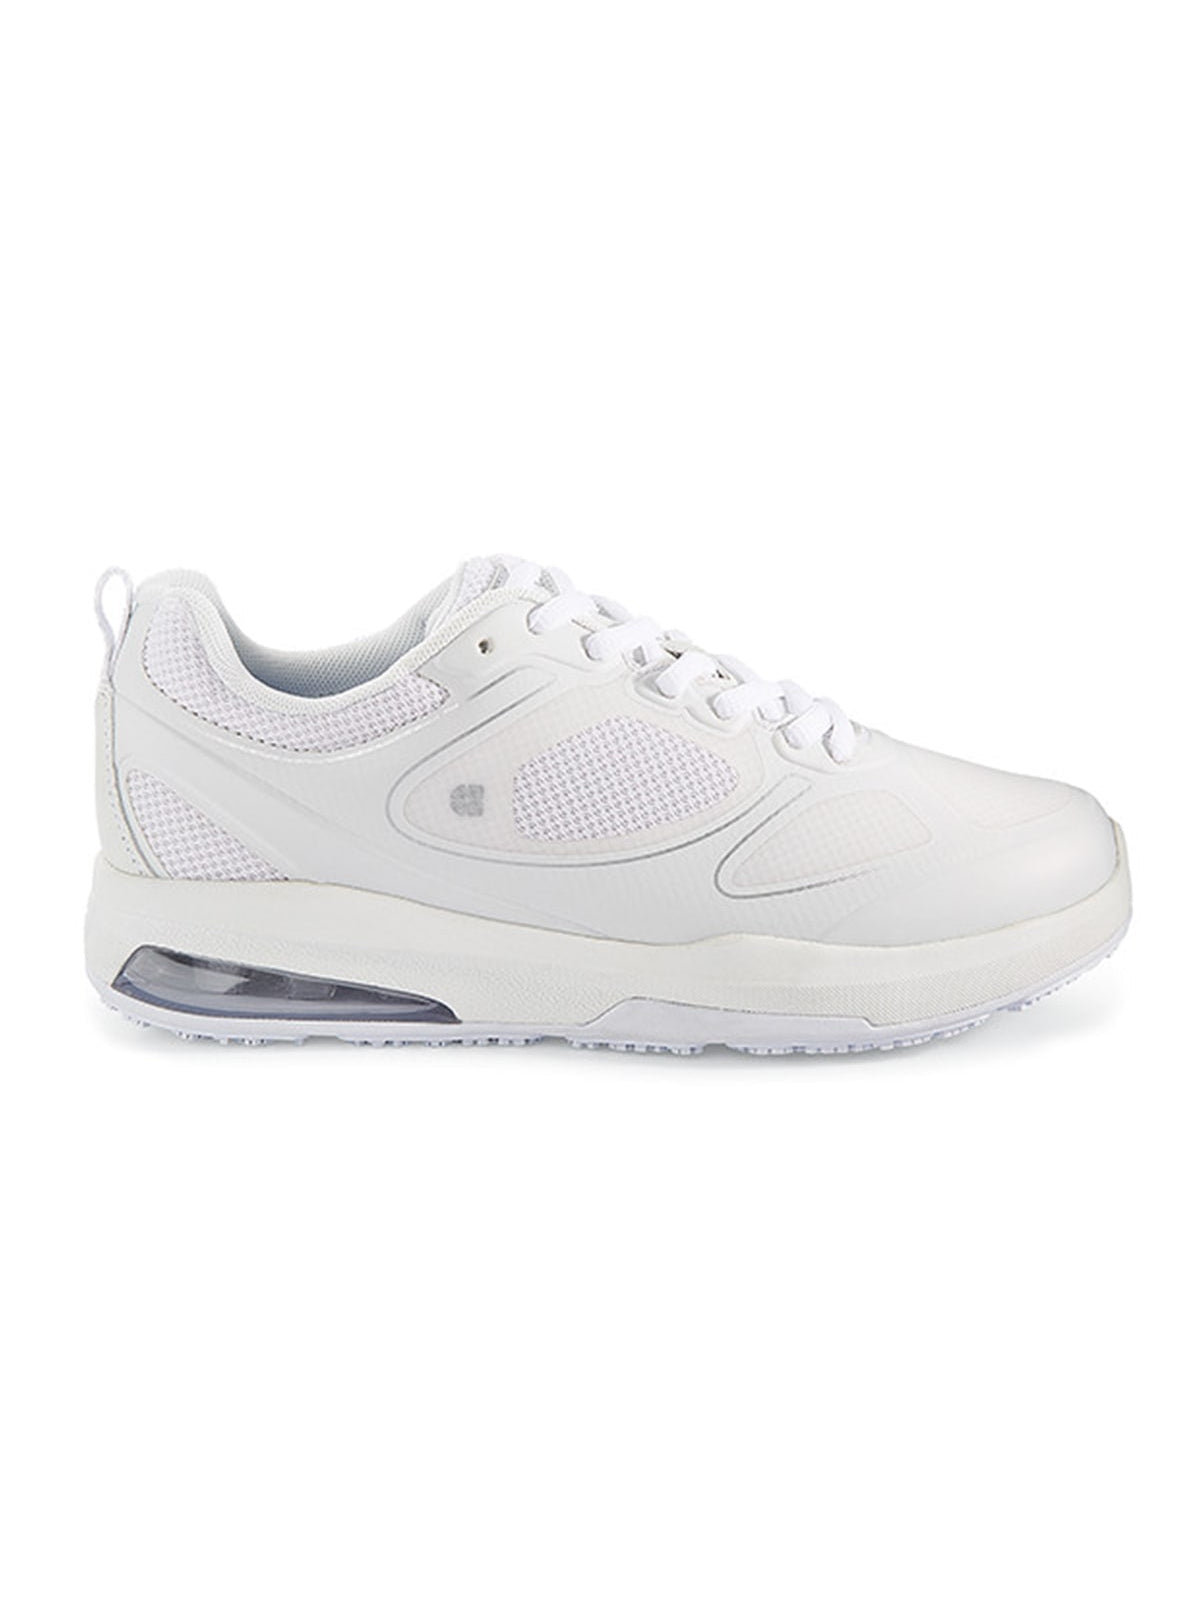 Men's Work Shoe Evolution Ii White by  Shoes For Crews.